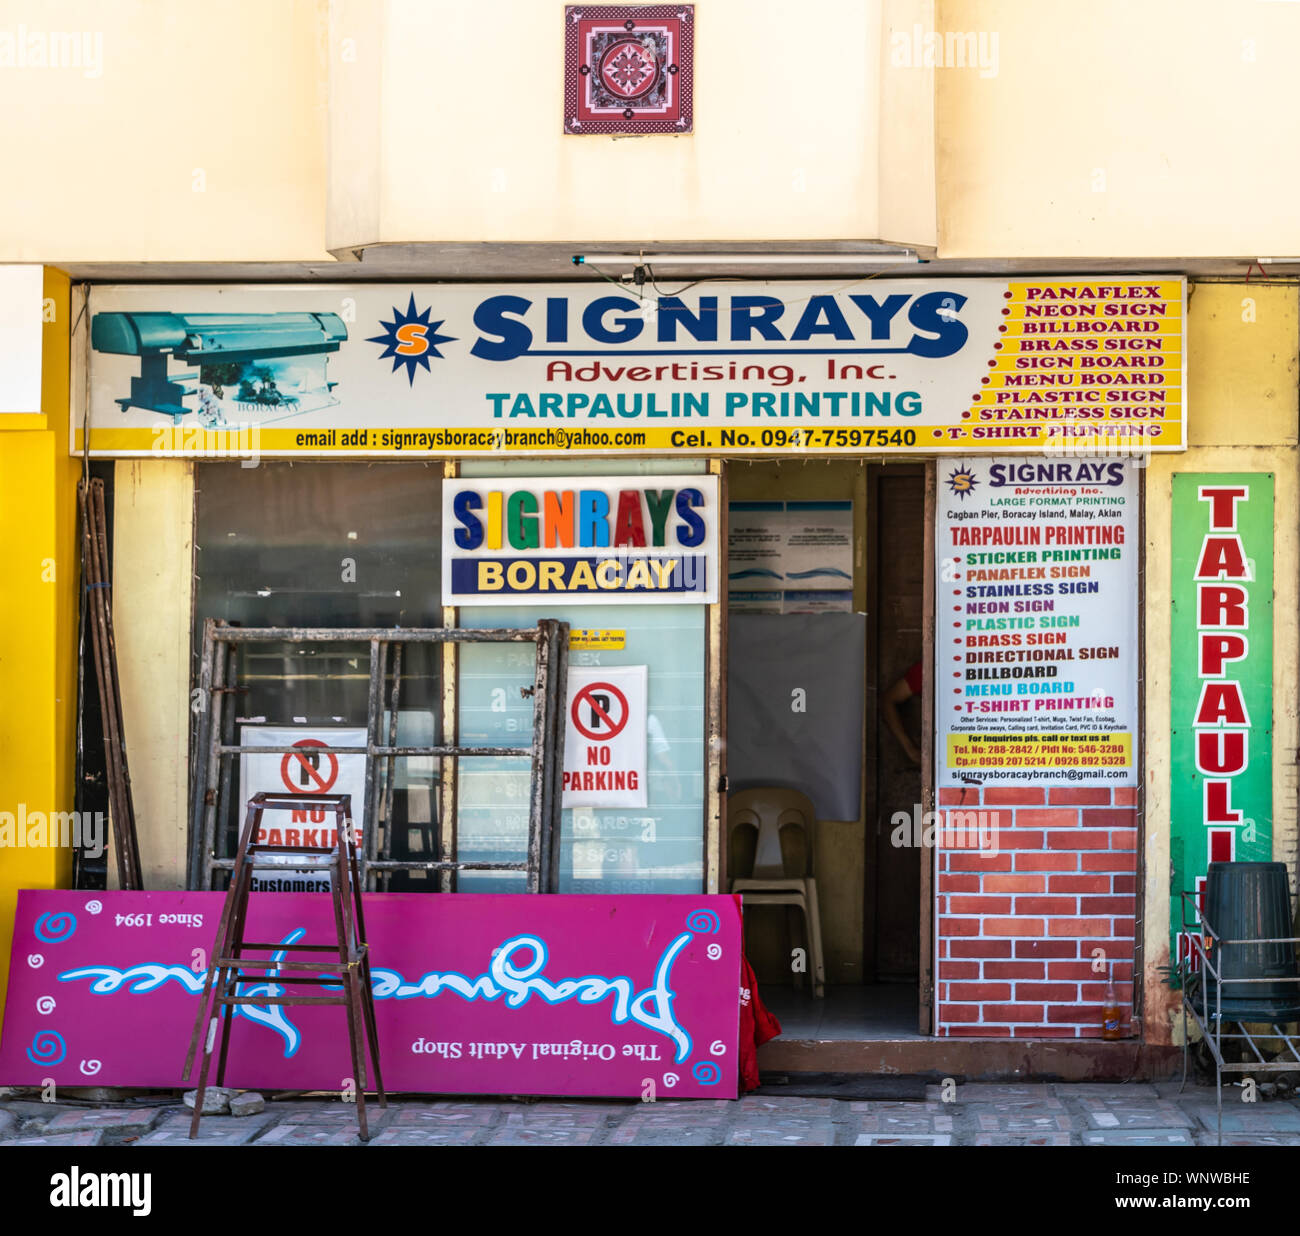 Manoc-Manoc, Boracay Island, Philippines - March 4, 2019: Near Cagban Jetty Port and ferry pier. Signrays advertising office has colorful displays. Stock Photo